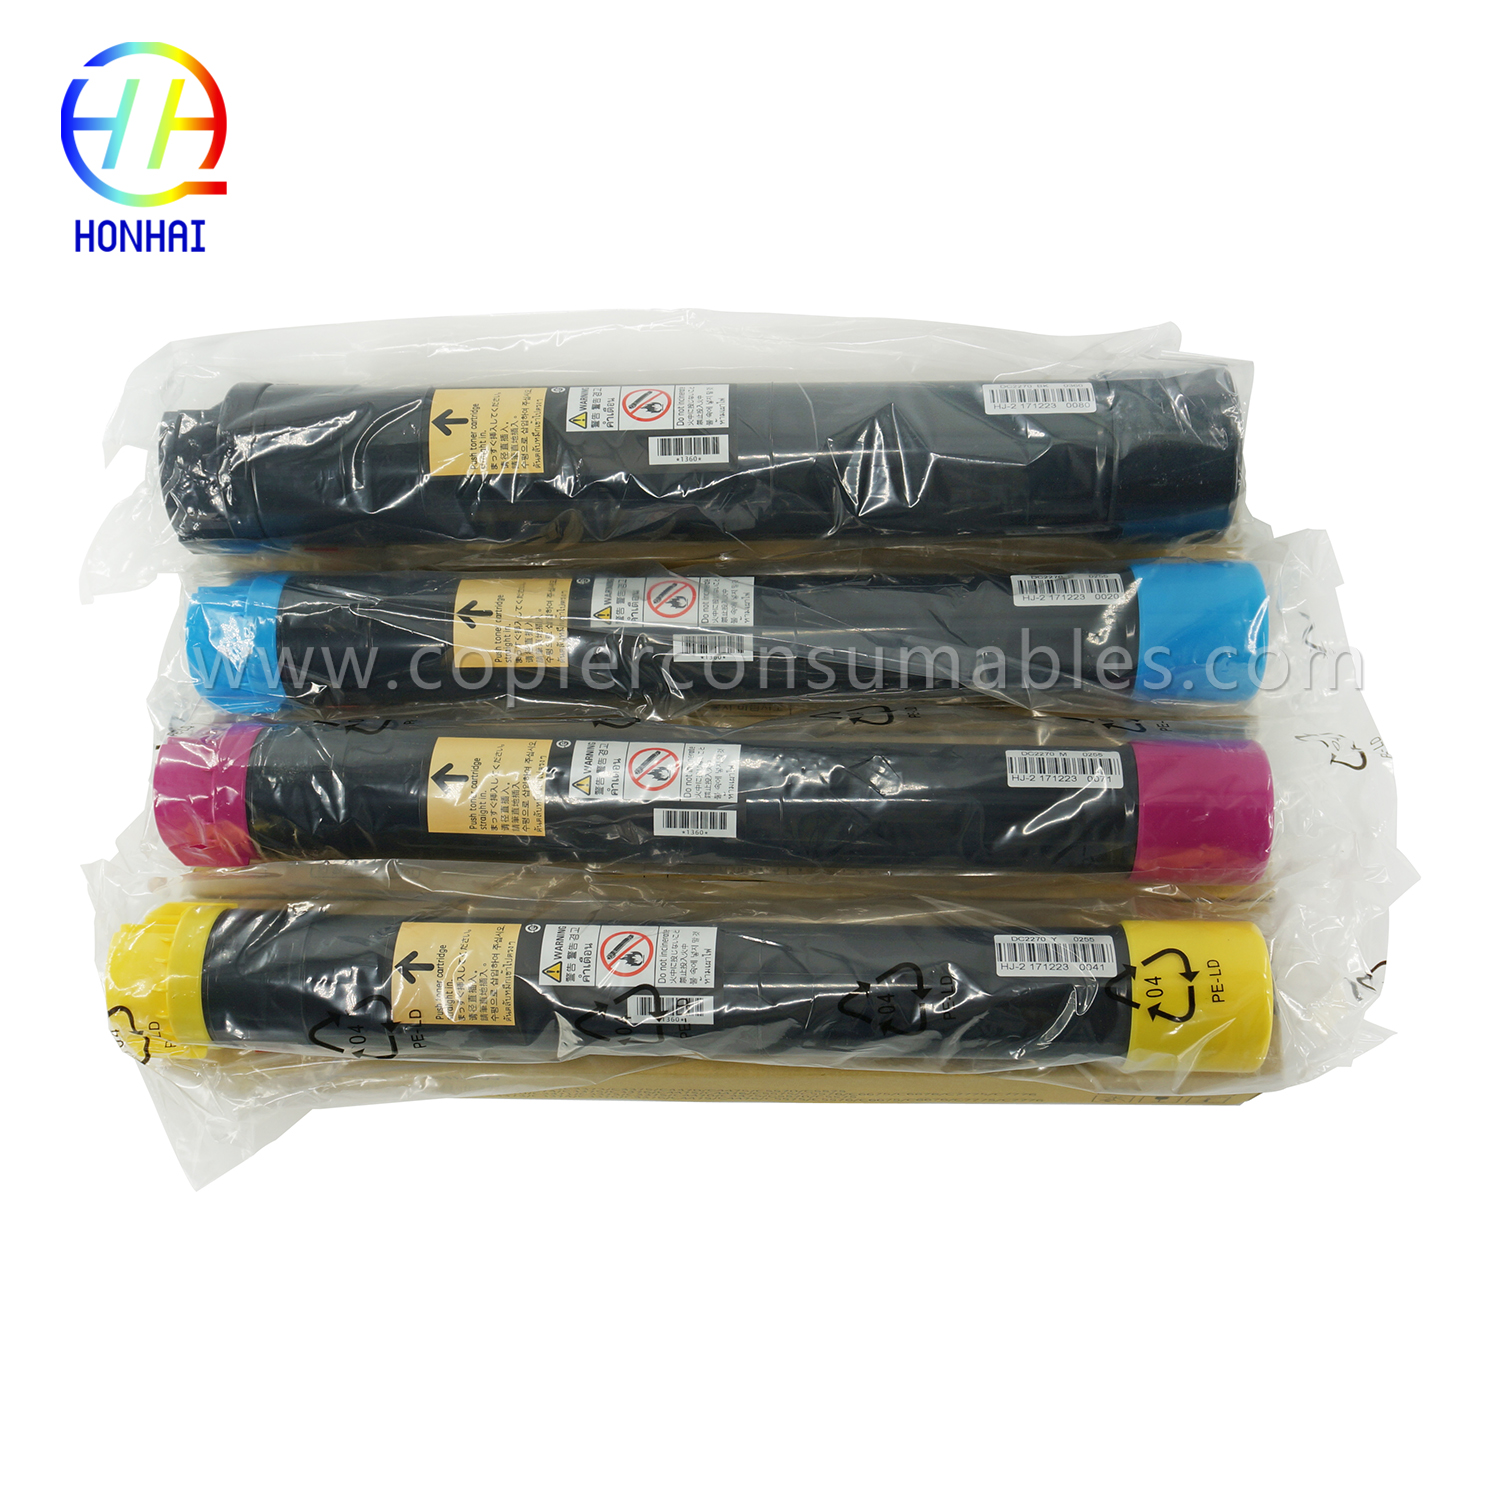 Toner Cartridge For Xerox Docucentre and Apeosport IV C2270 C2275 C3370 C3371 C3373 C3375 C4470 C4475 C5570 C5575 For Xerox Docucentre and Apeosport V C2275 C3373 C4475 C5575 C6675 C7775  (8)